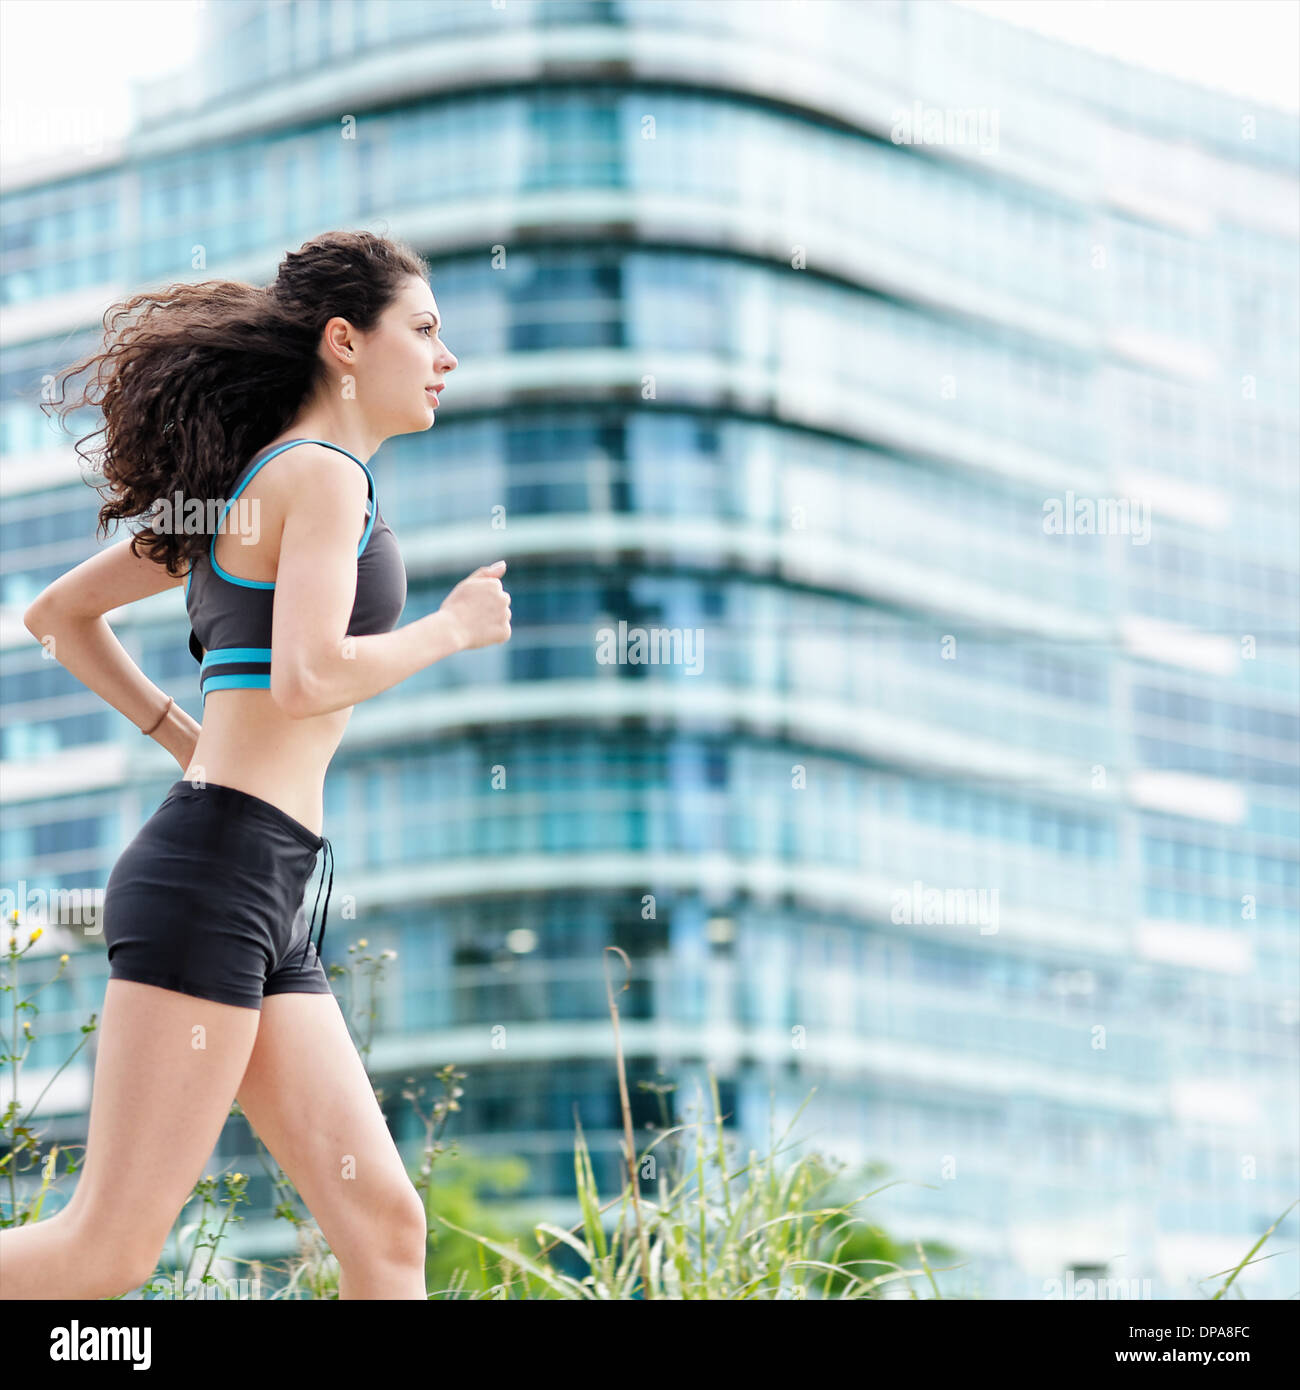 Young woman running in city Banque D'Images